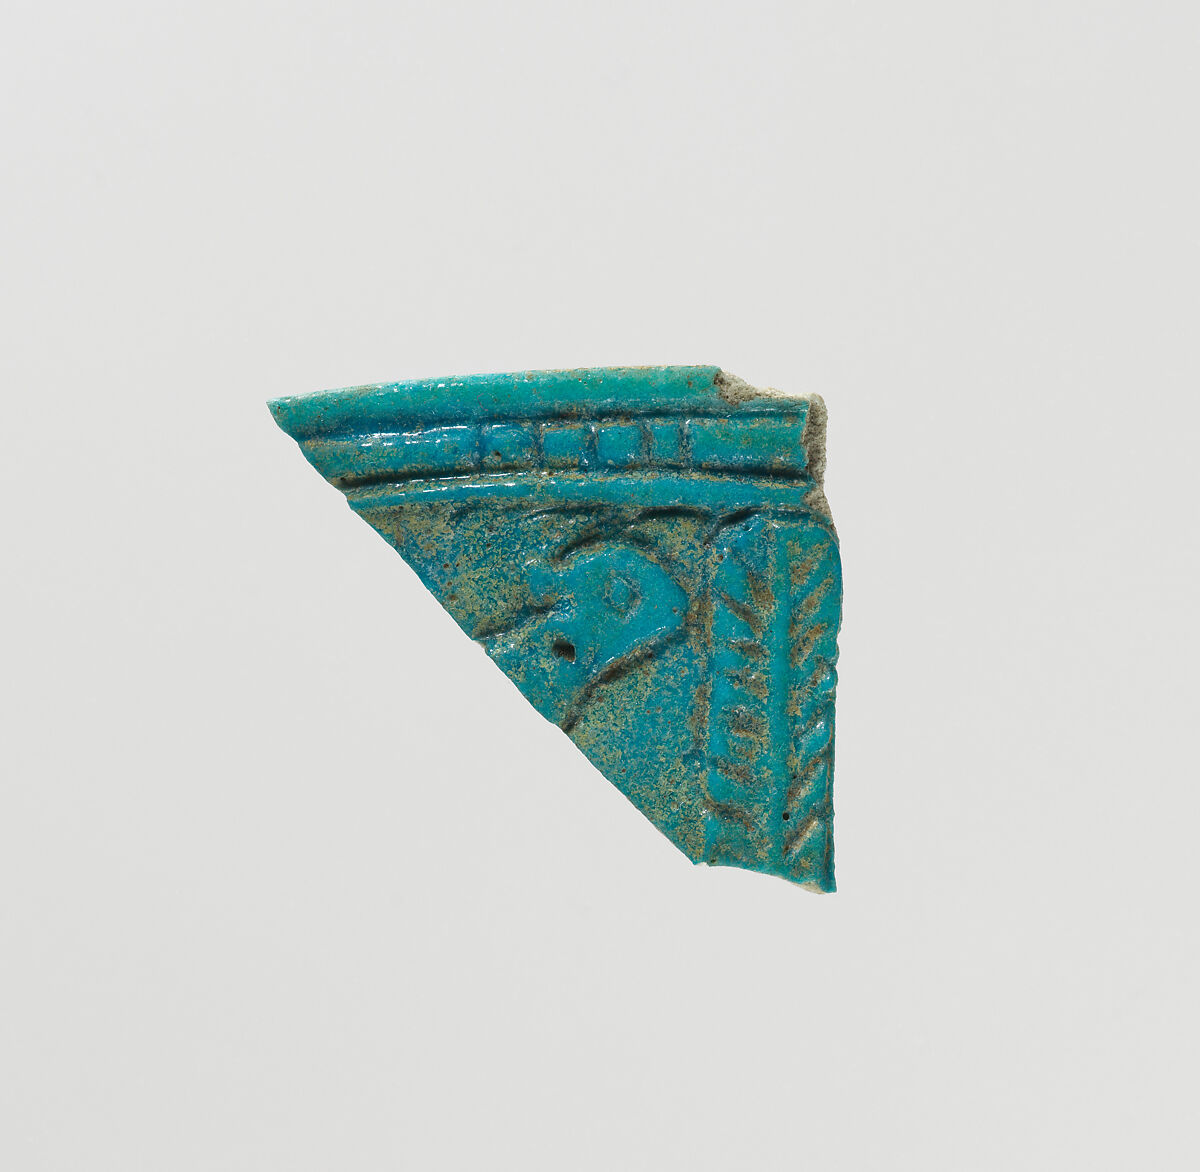 Rim fragment with head of calf and "stylized trees", Faience 